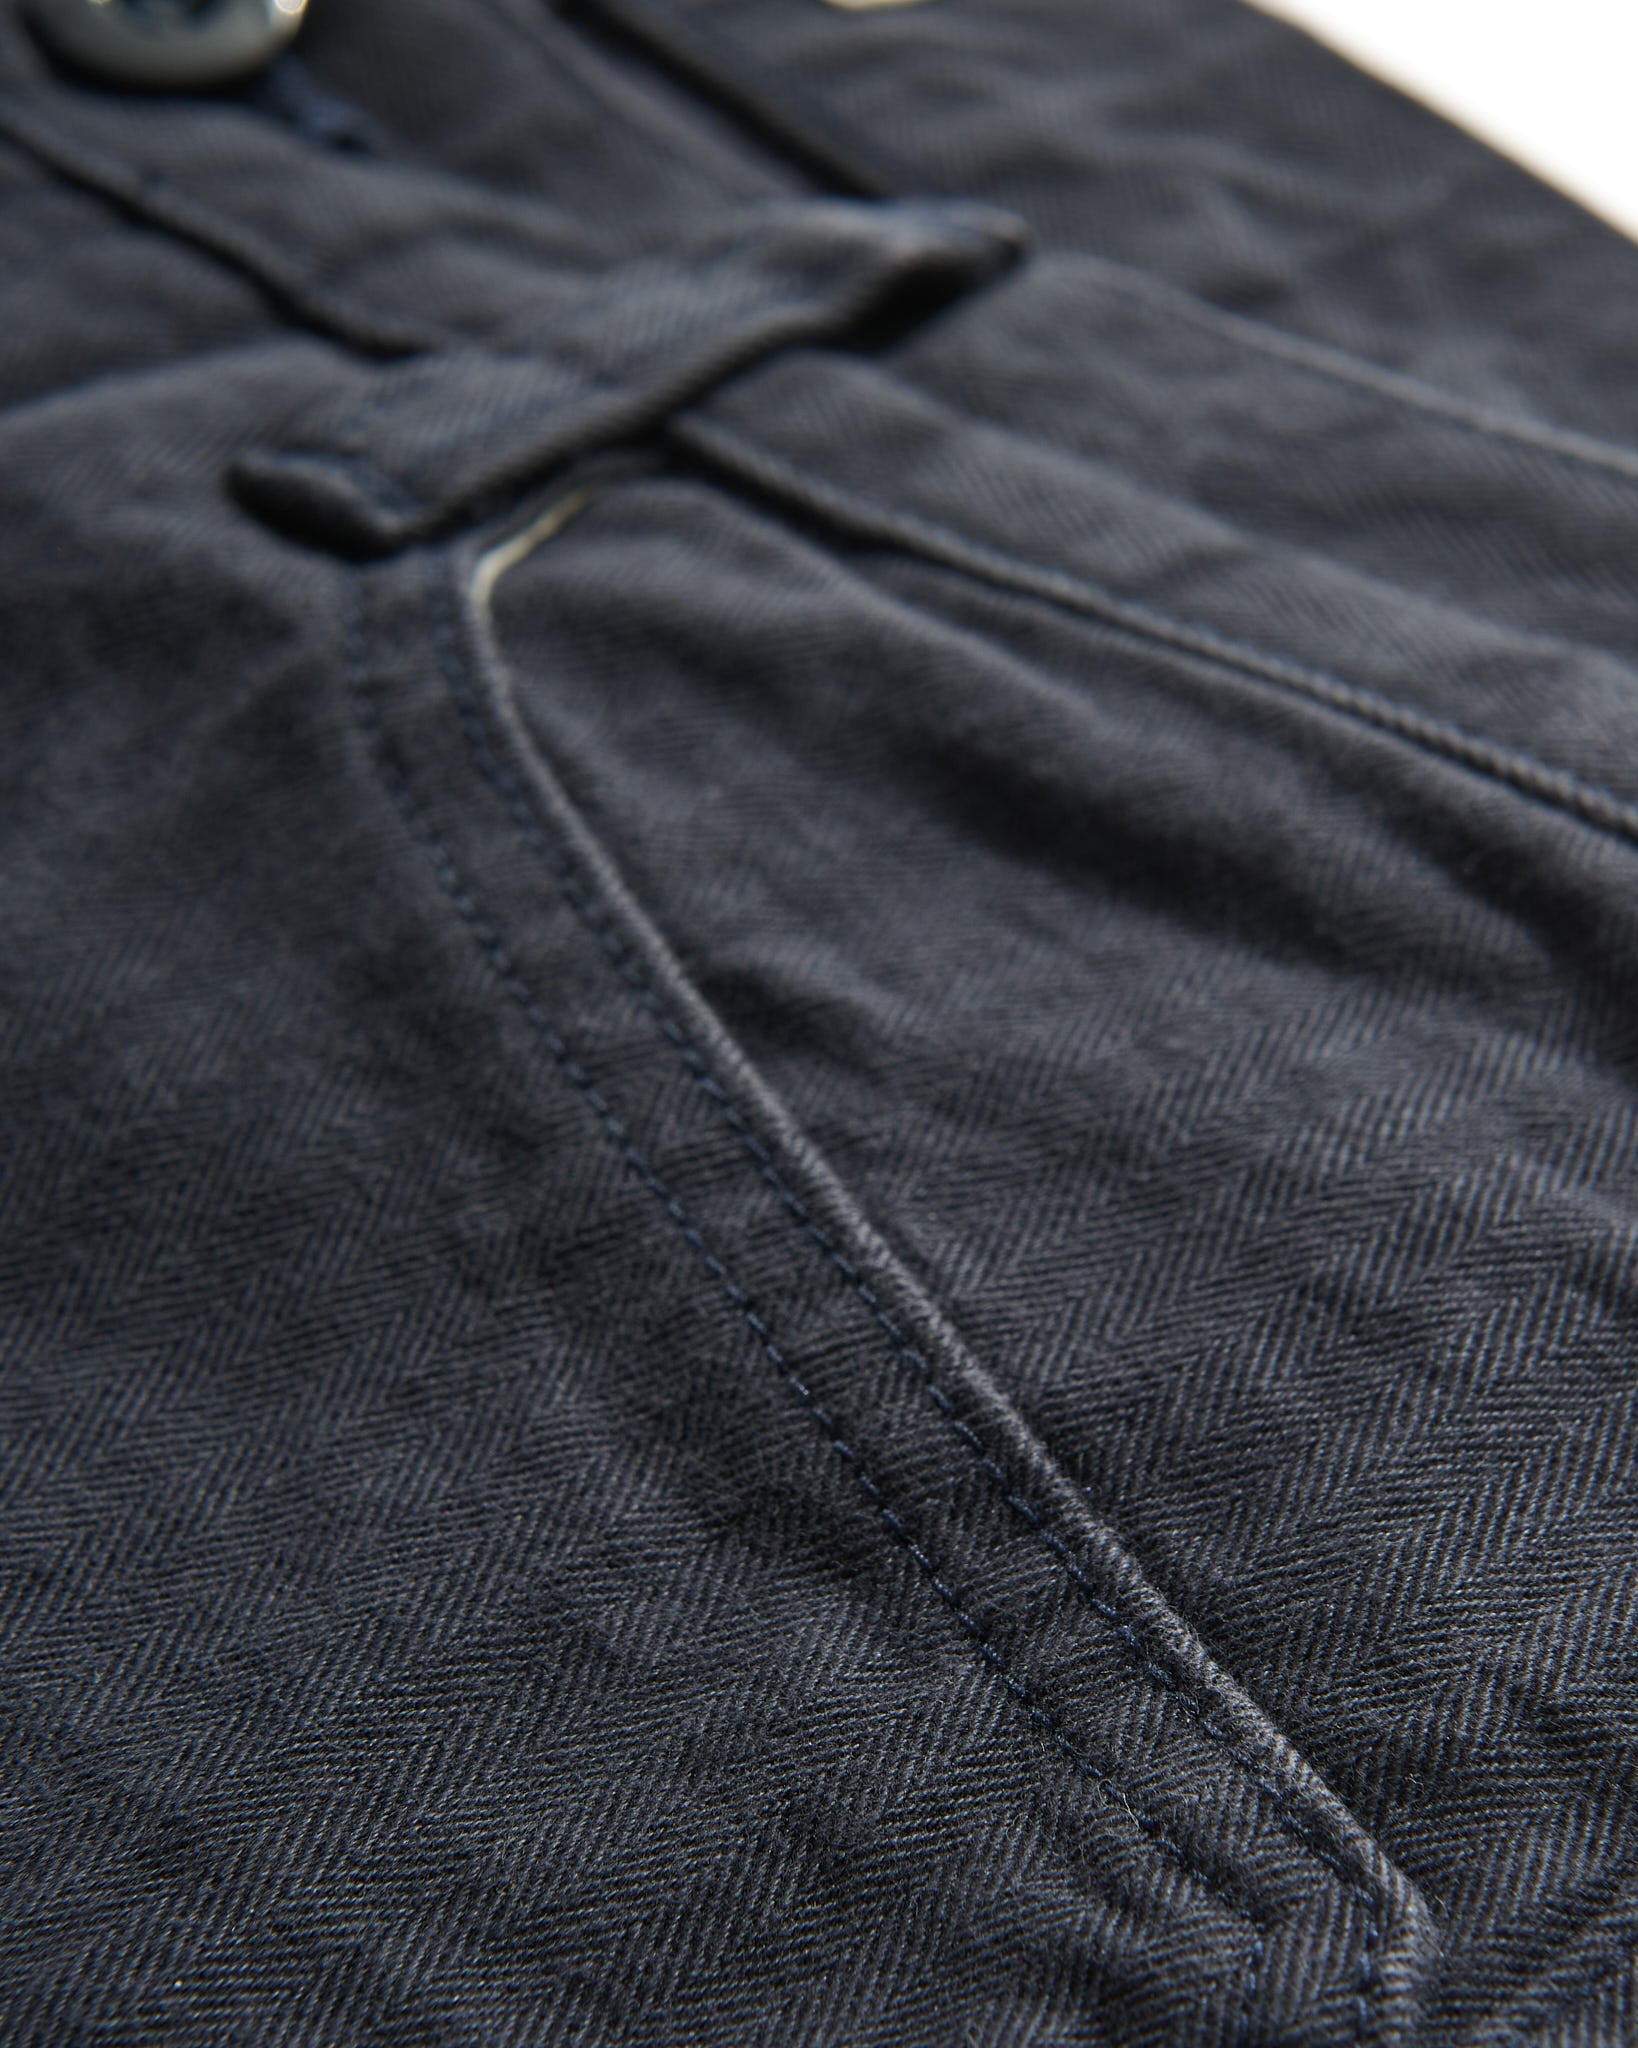 French Pocket Trouser in Navy HBT